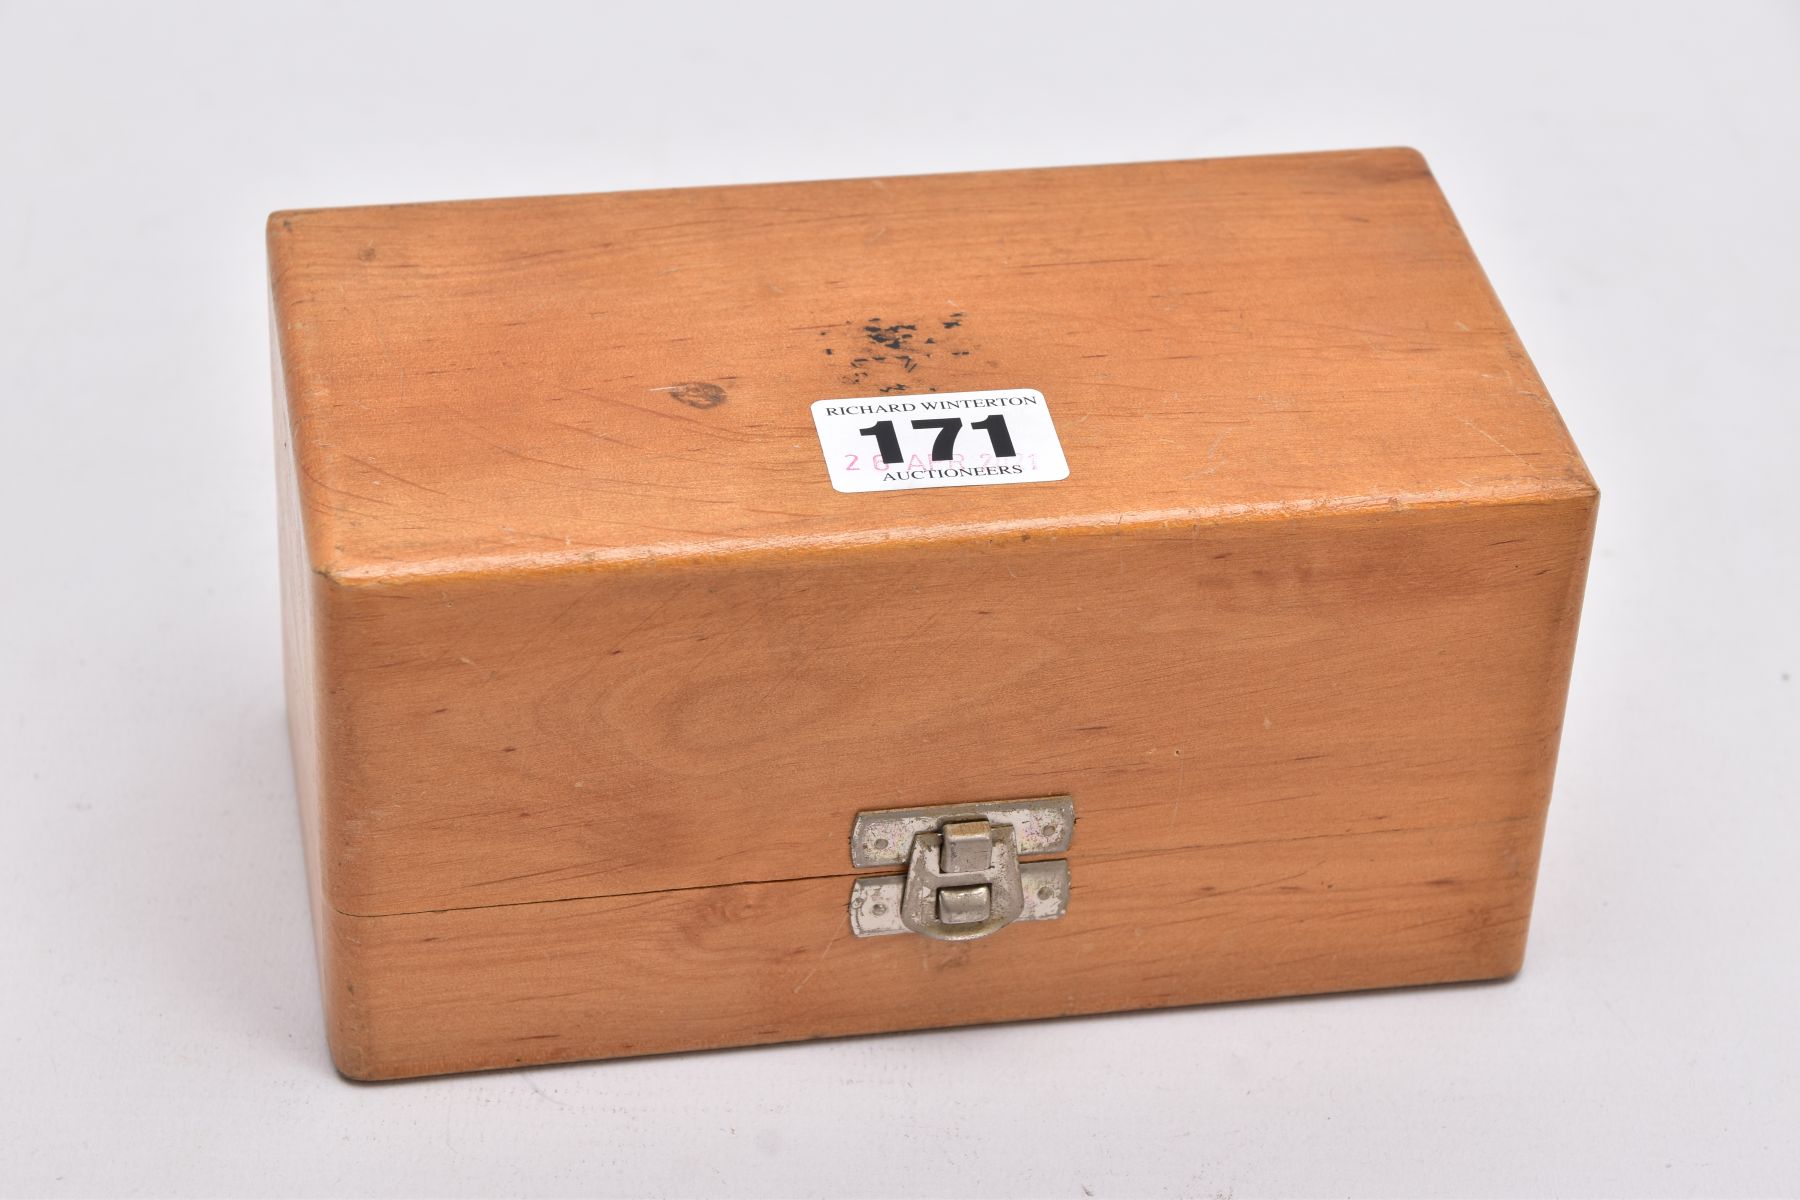 A 'JKA FEINTASTER' PRECISION MIRCOMETER DIAL GAUGE, fitted within original box - Image 11 of 12